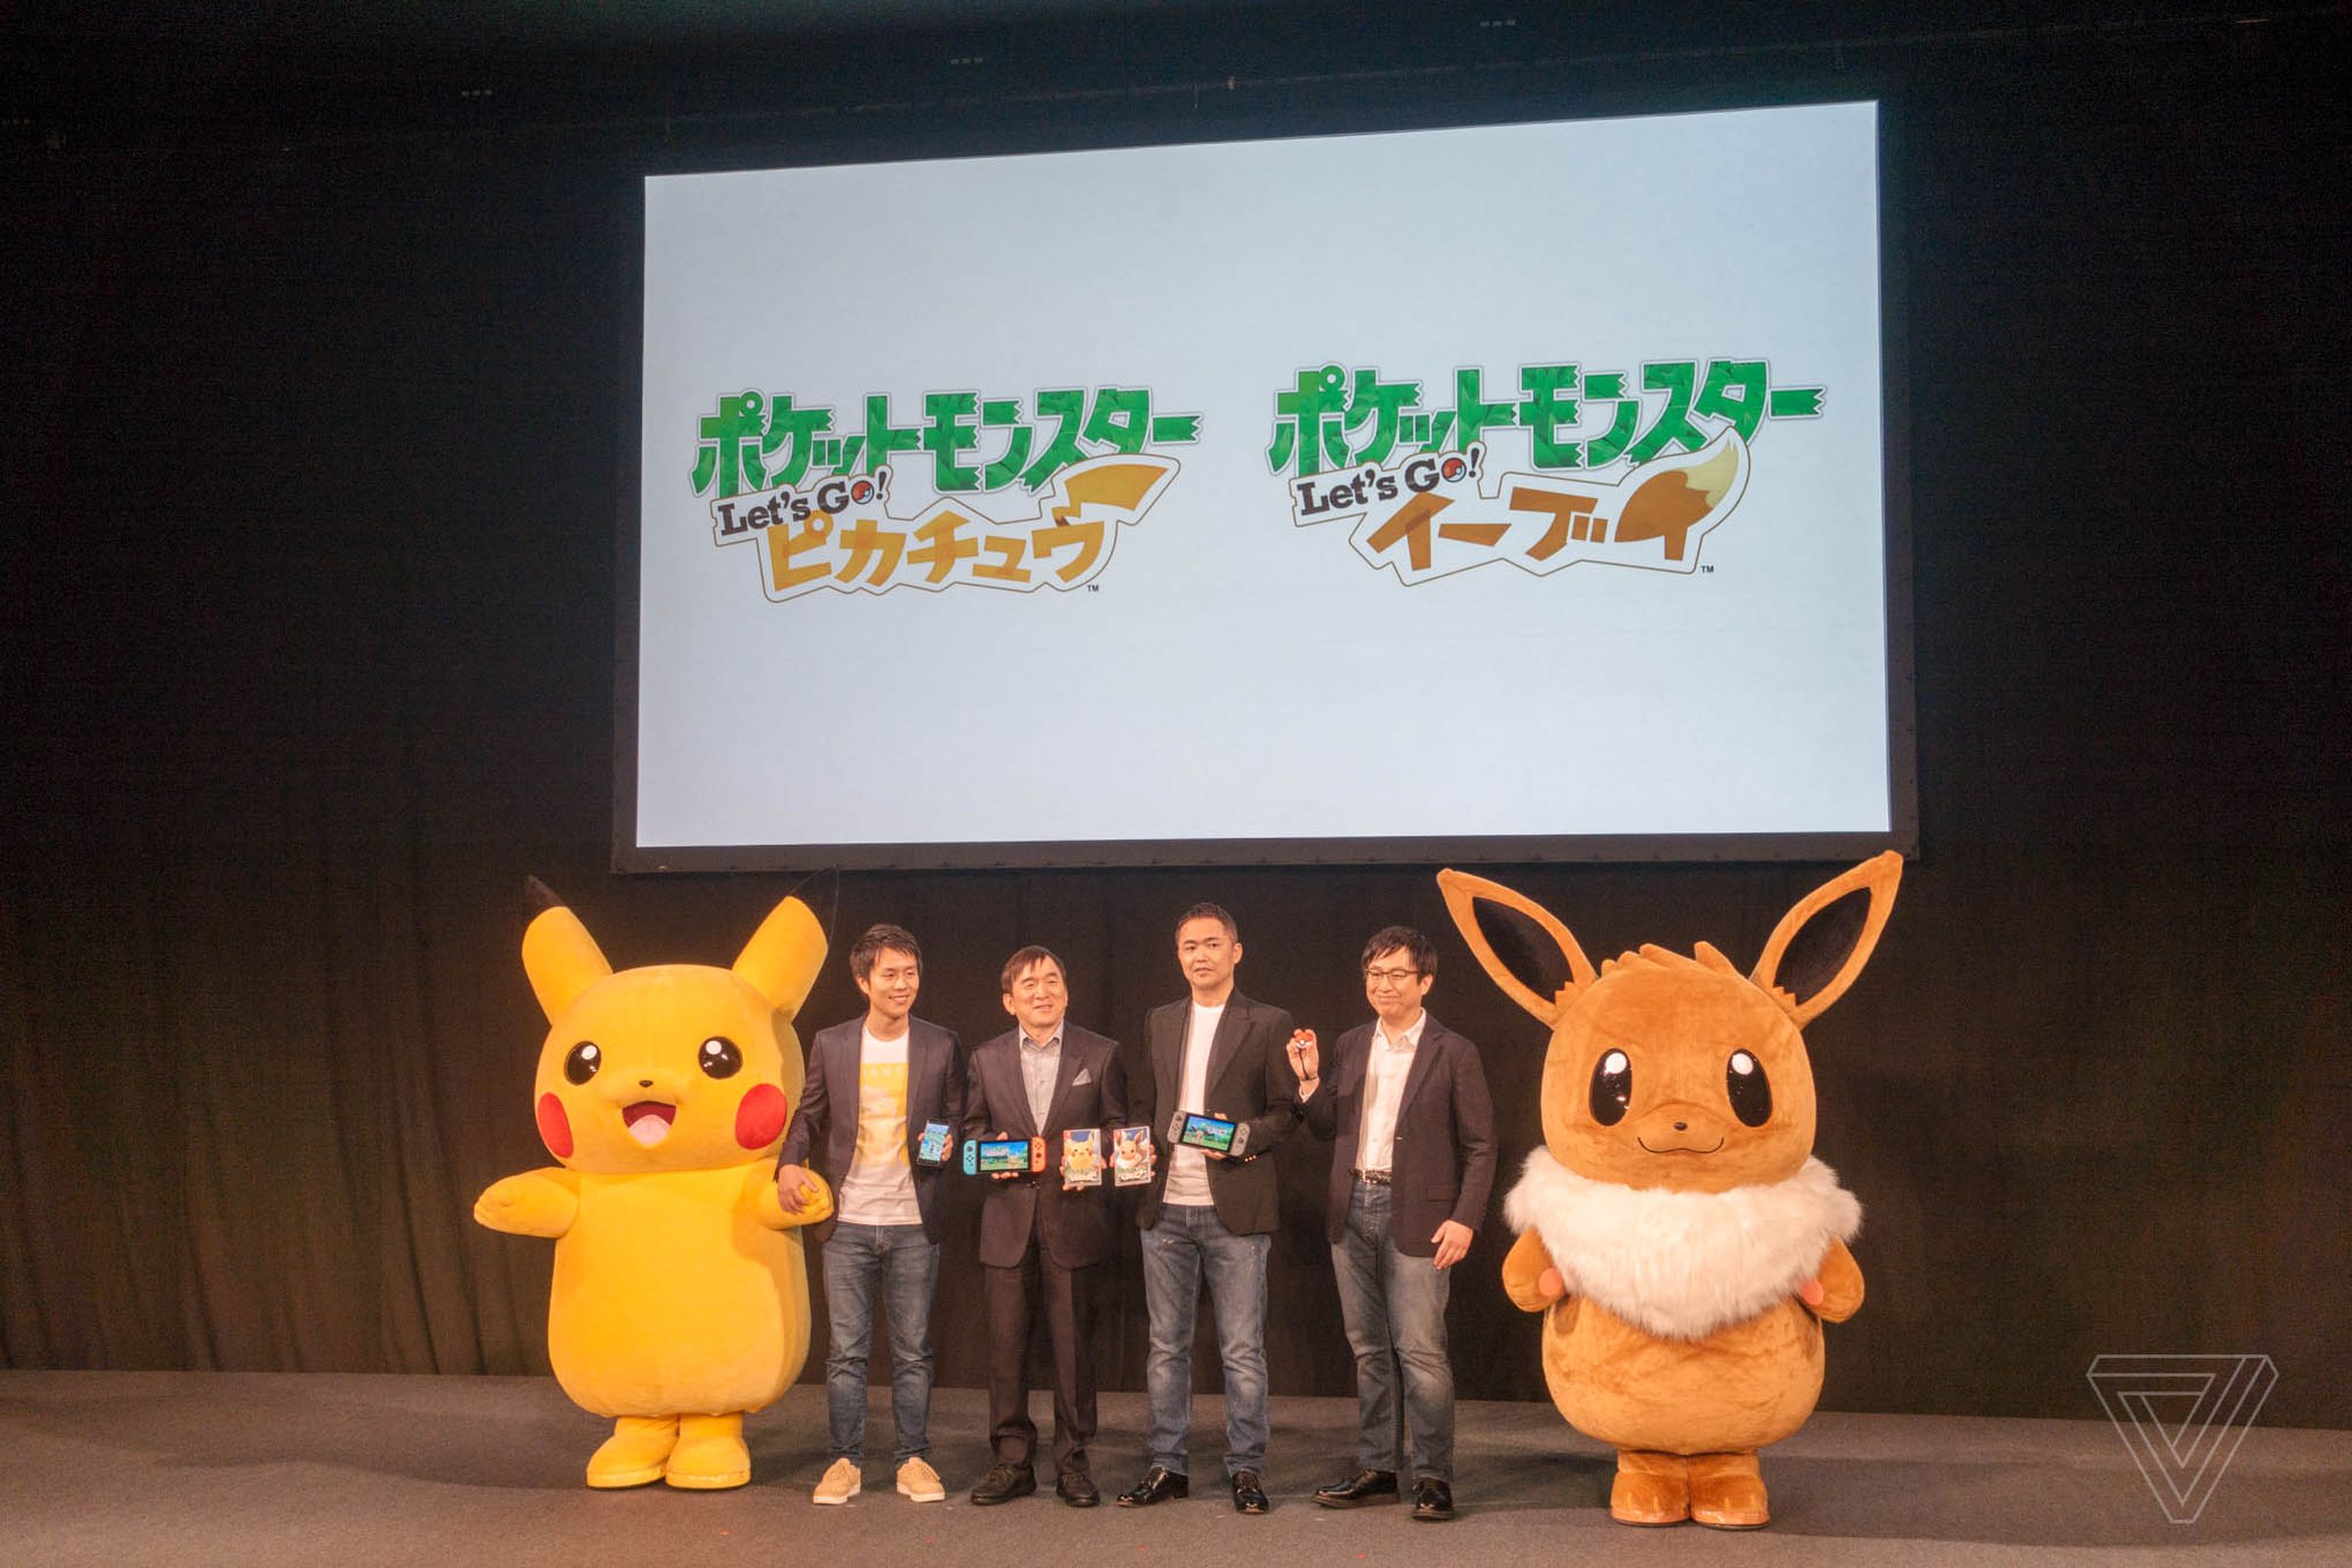 Executives from Niantic, The Pokemon Company, Game Freak, and Nintendo on stage in Tokyo today